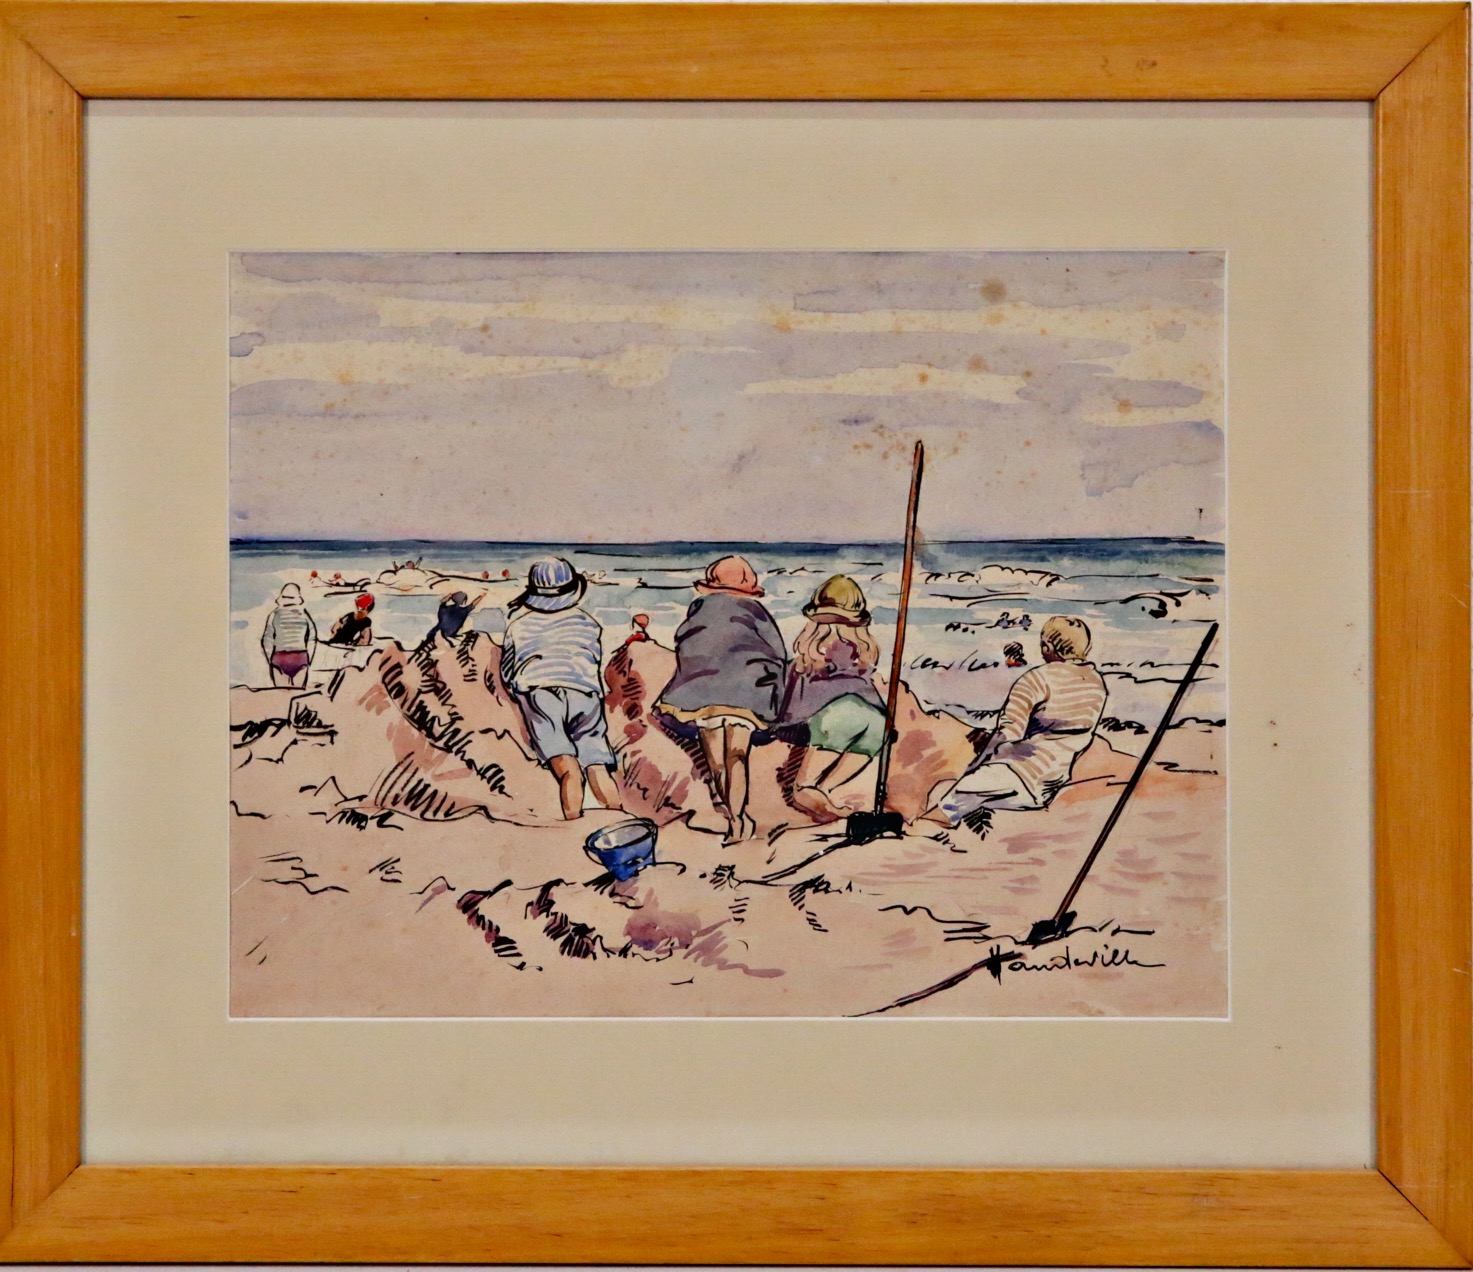 Leon HAUDEVILLE (1885-1969) "Children at the beach", watercolor on paper, French painting, 20th _. - Image 2 of 5